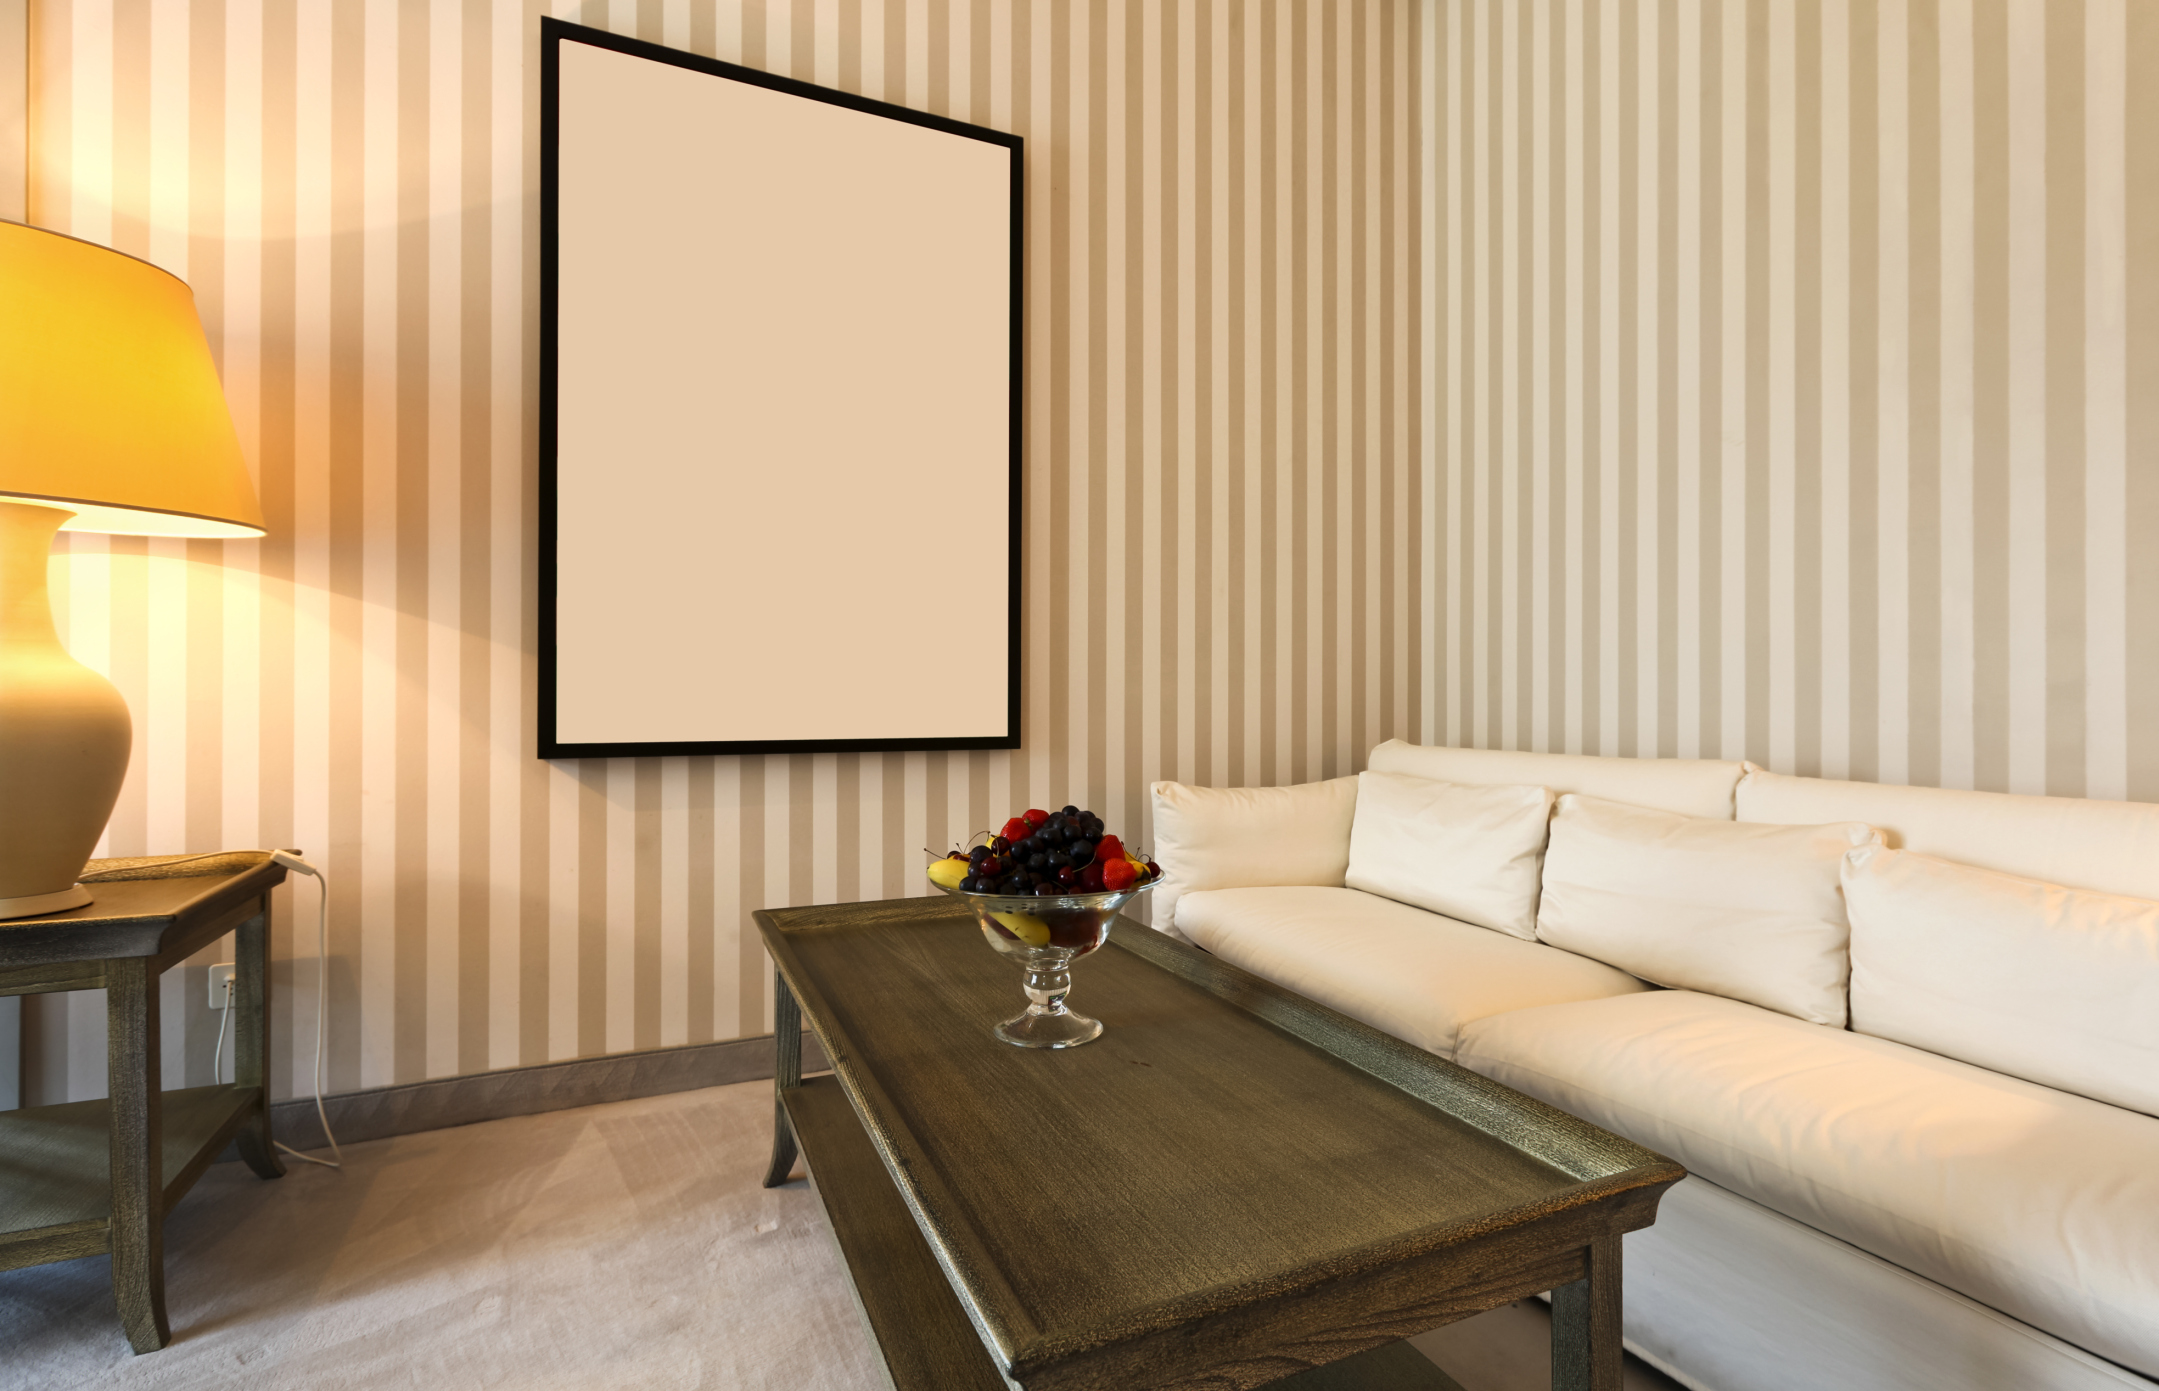 Living Room Wall Painting & Colour Combination Ideas - Berger Paints